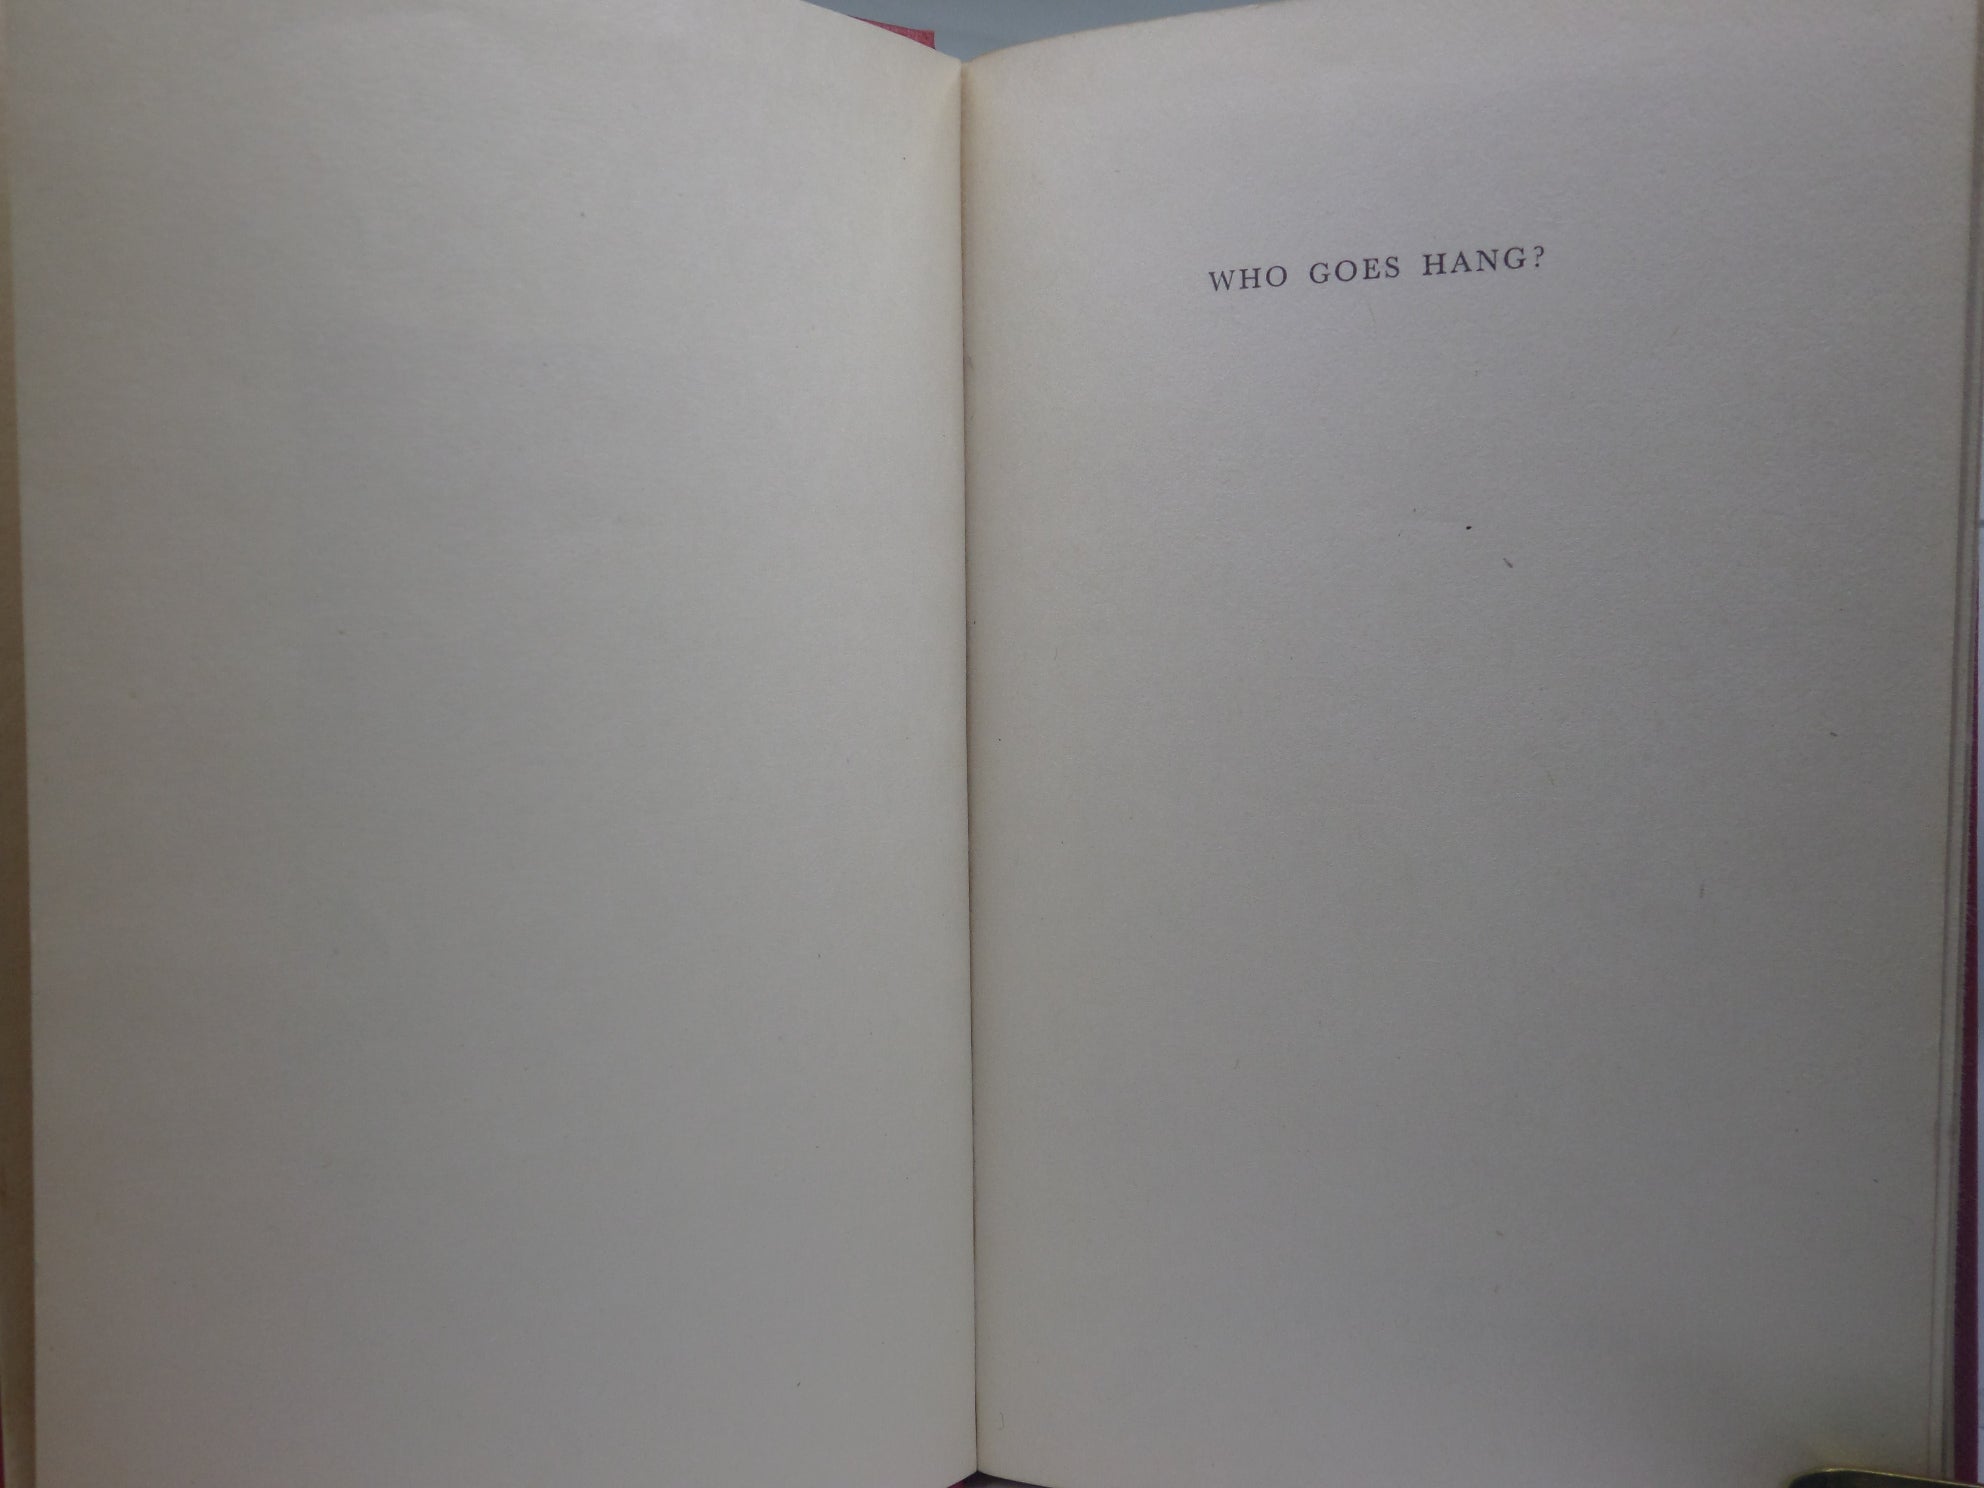 WHO GOES HANG? BY STANLEY HYLAND 1958 FIRST EDITION HARDCOVER